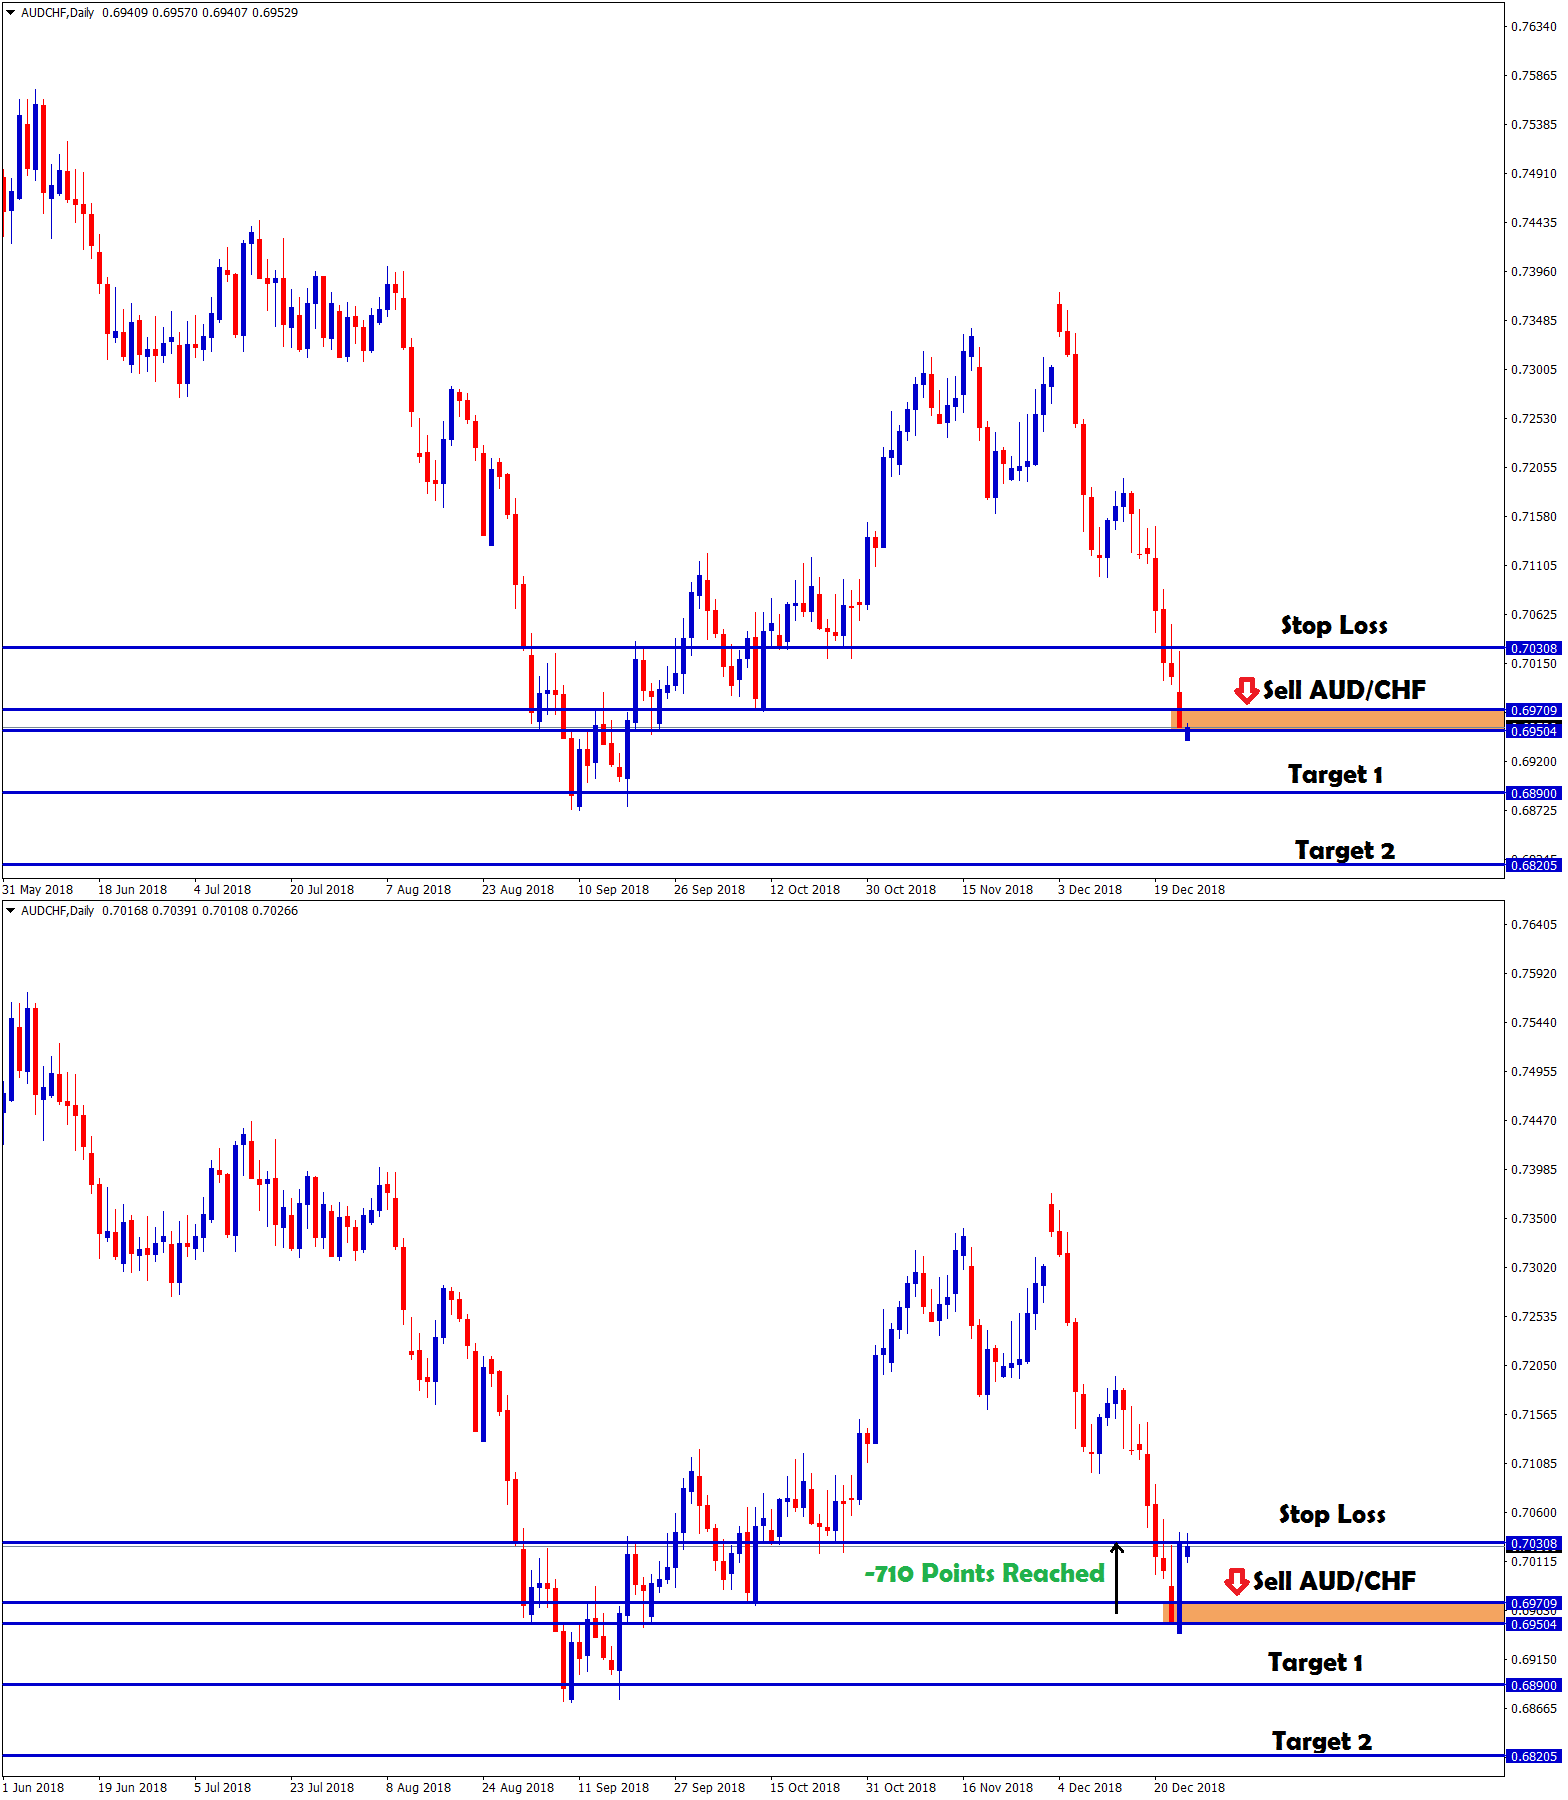 aud chf reached stop loss with -710 points